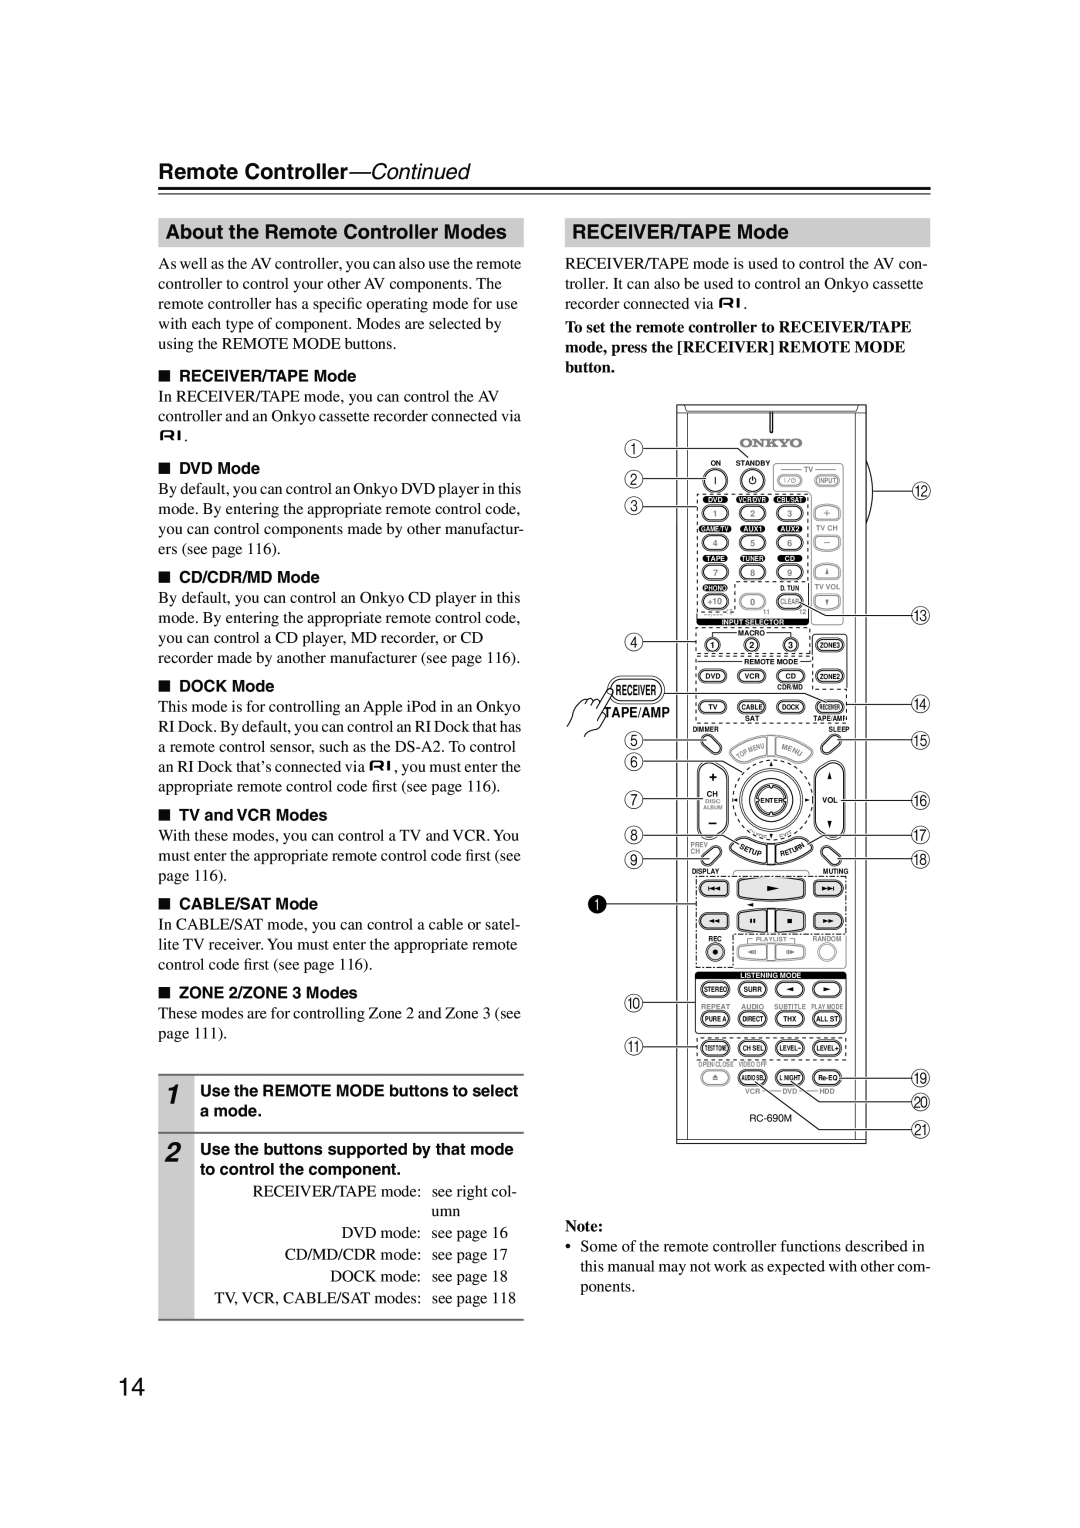 Onkyo PR-SC885 instruction manual Remote Controller—Continued, About the Remote Controller Modes, RECEIVER/TAPE Mode 